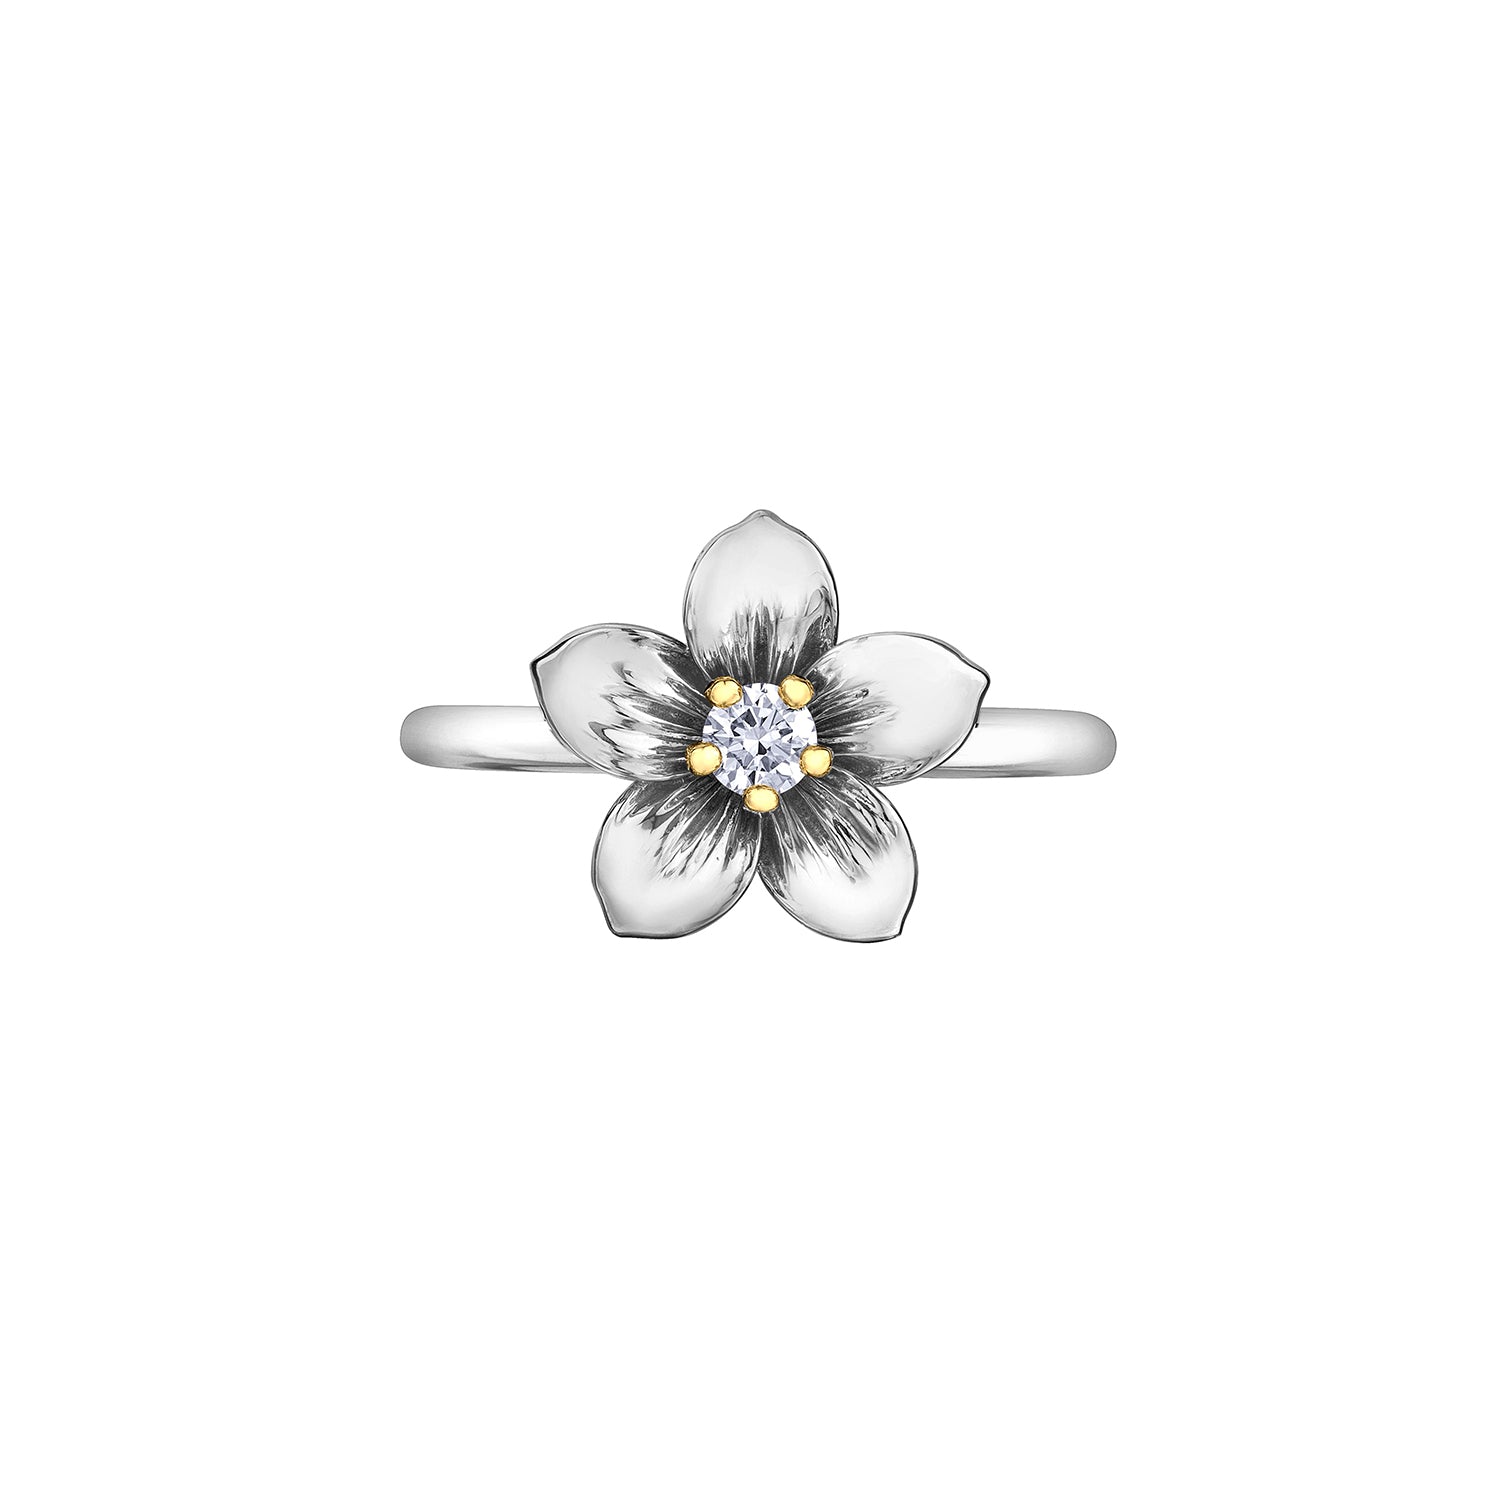 Crafted in 14KT yellow and white Certified Canadian Gold, this ring features a Nova Scotia mayflower set with a round brilliant-cut Canadian diamond